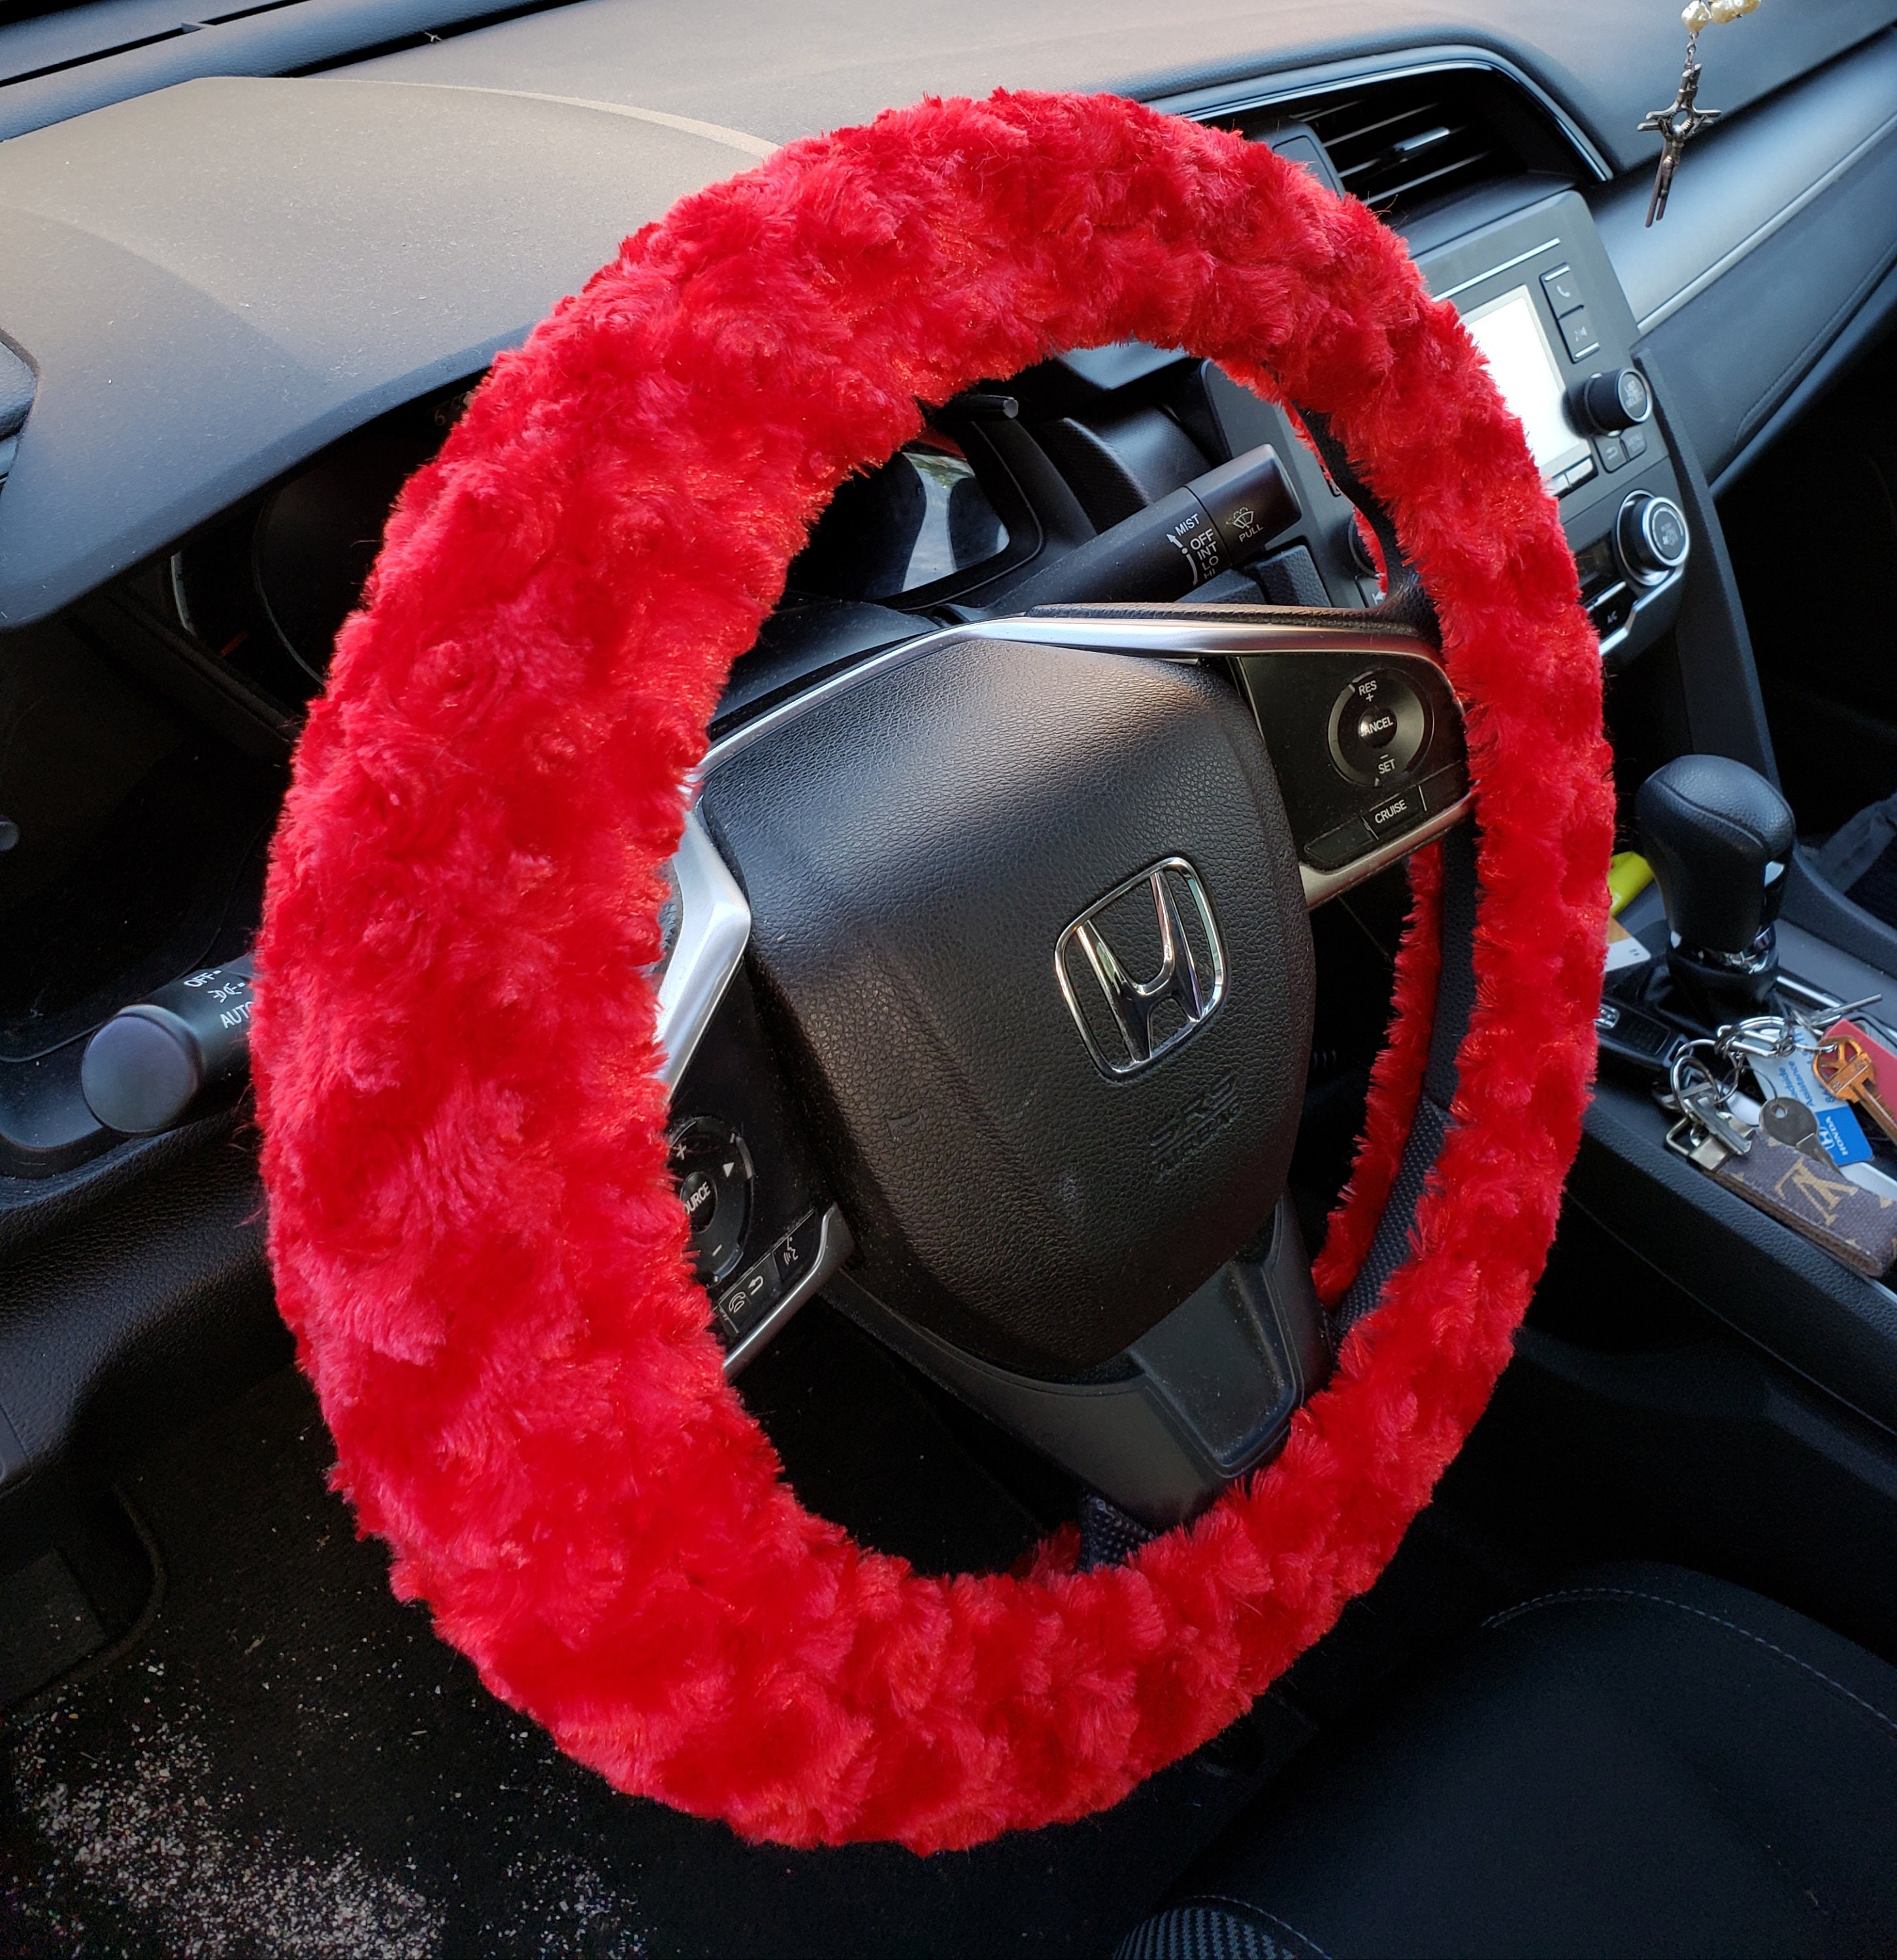 Red Minky Rosette Soft Faux Fur Steering Wheel Cover Women Car Accessories  Holiday Gift Idea Car Warming Gift 